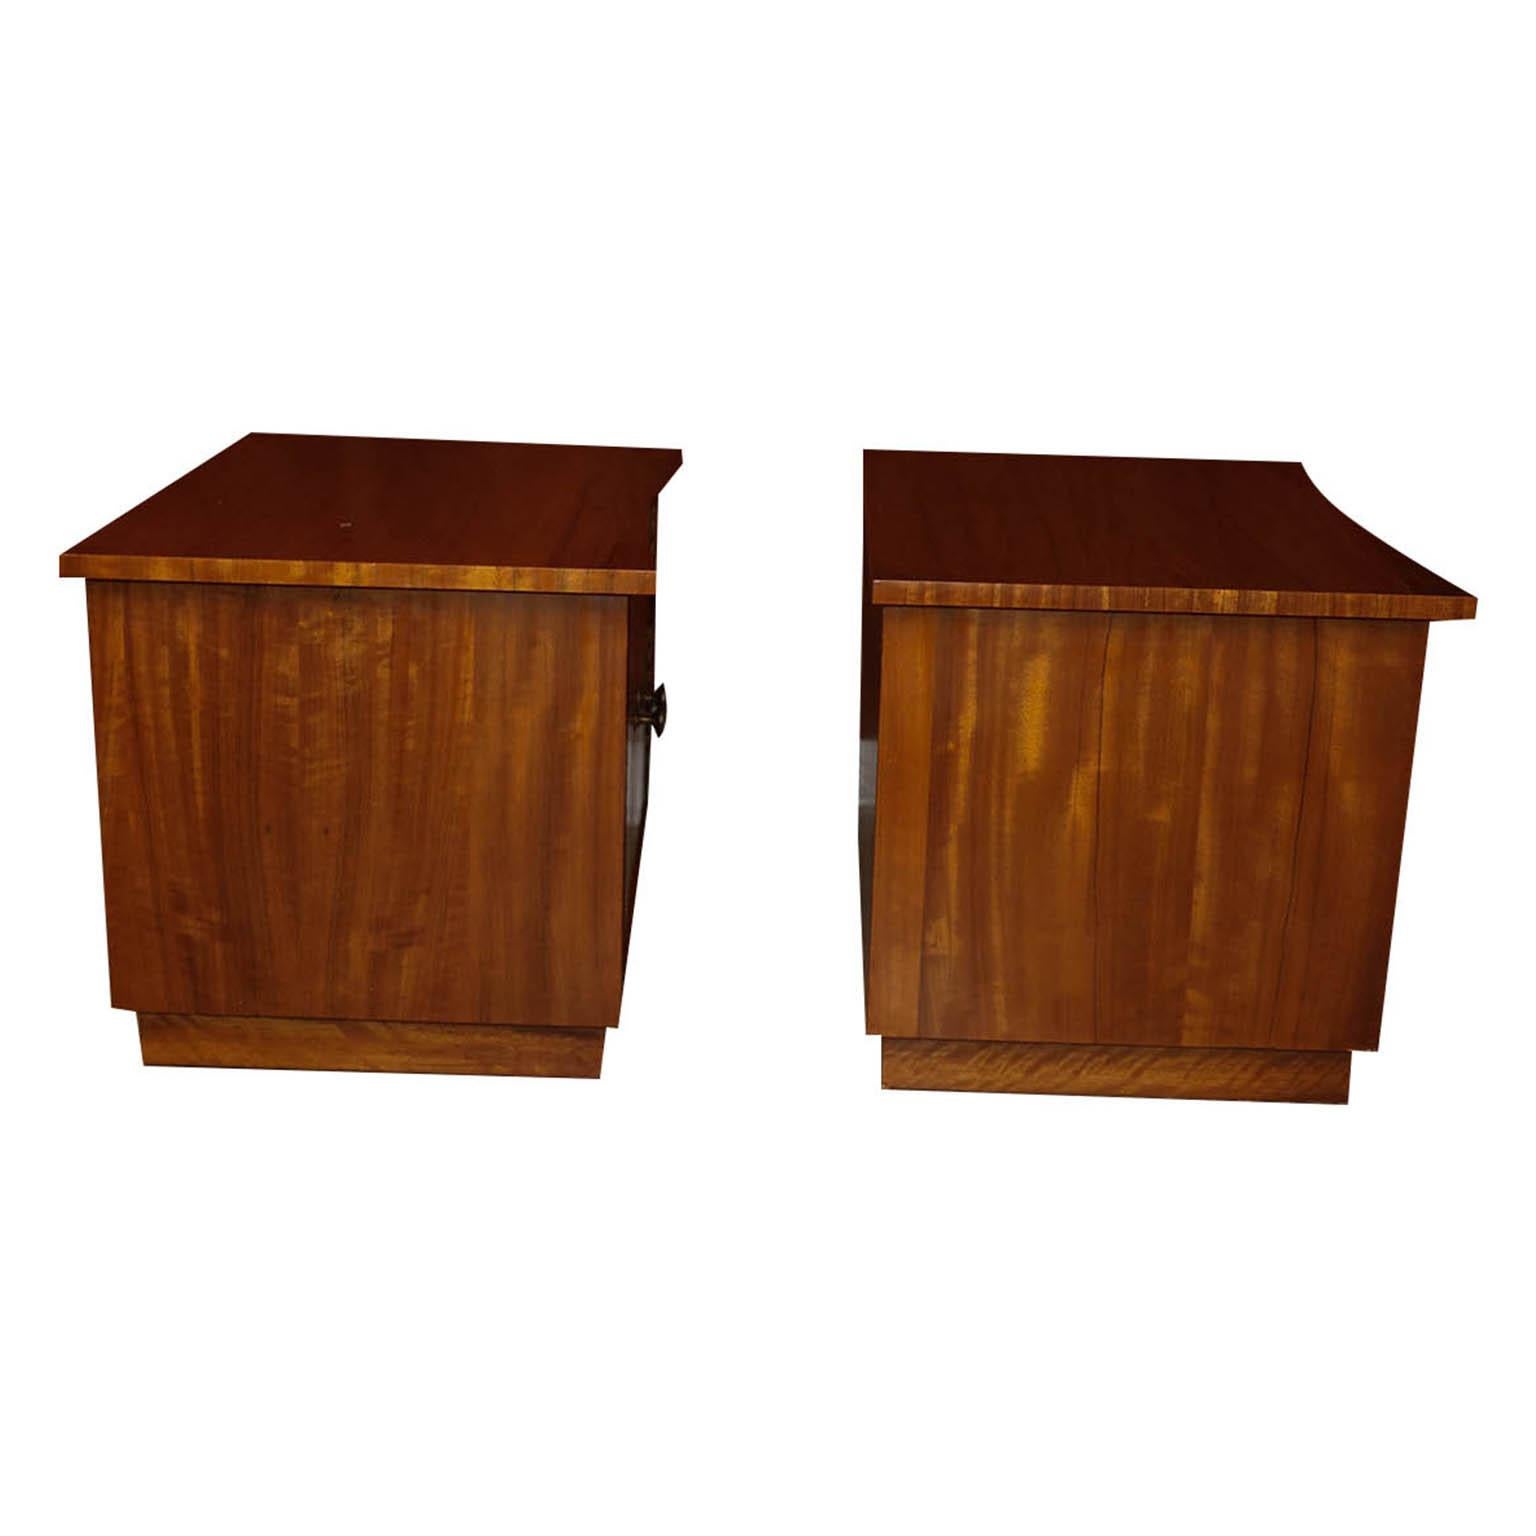 Midcentury Lane Furniture Nightstands Cabinets Tables 2